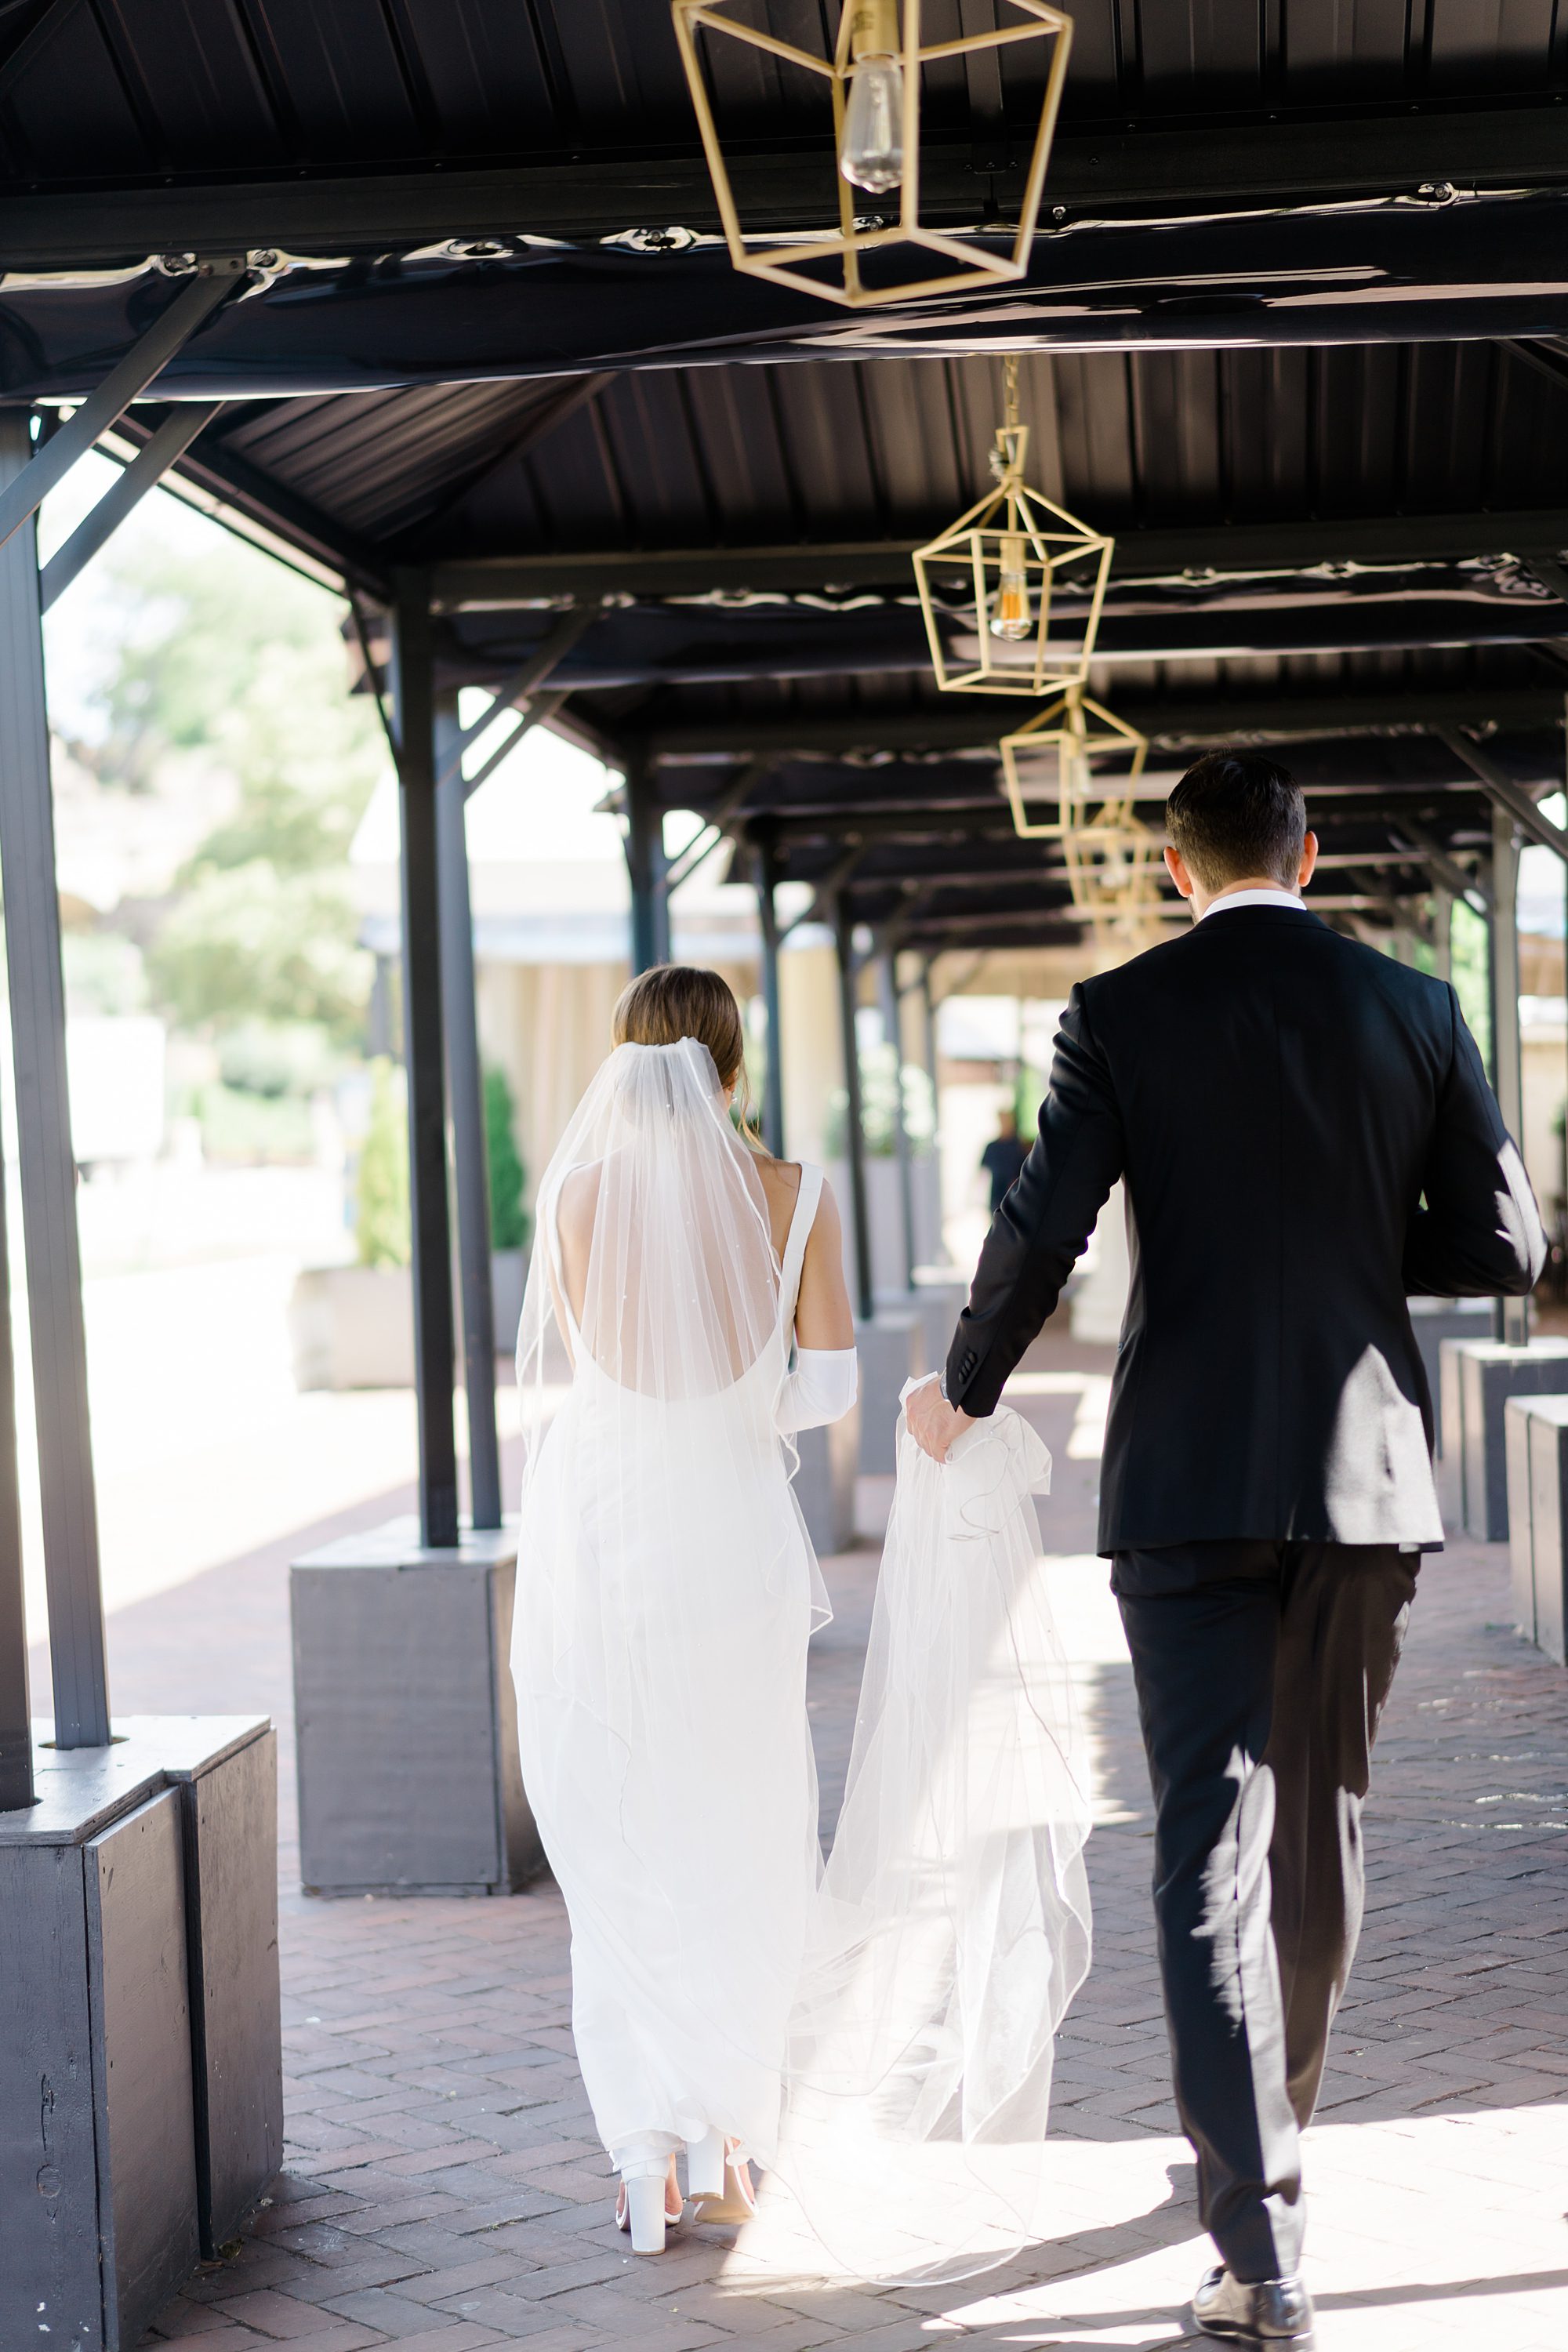 groom holds bride's wedding dress as they walk together